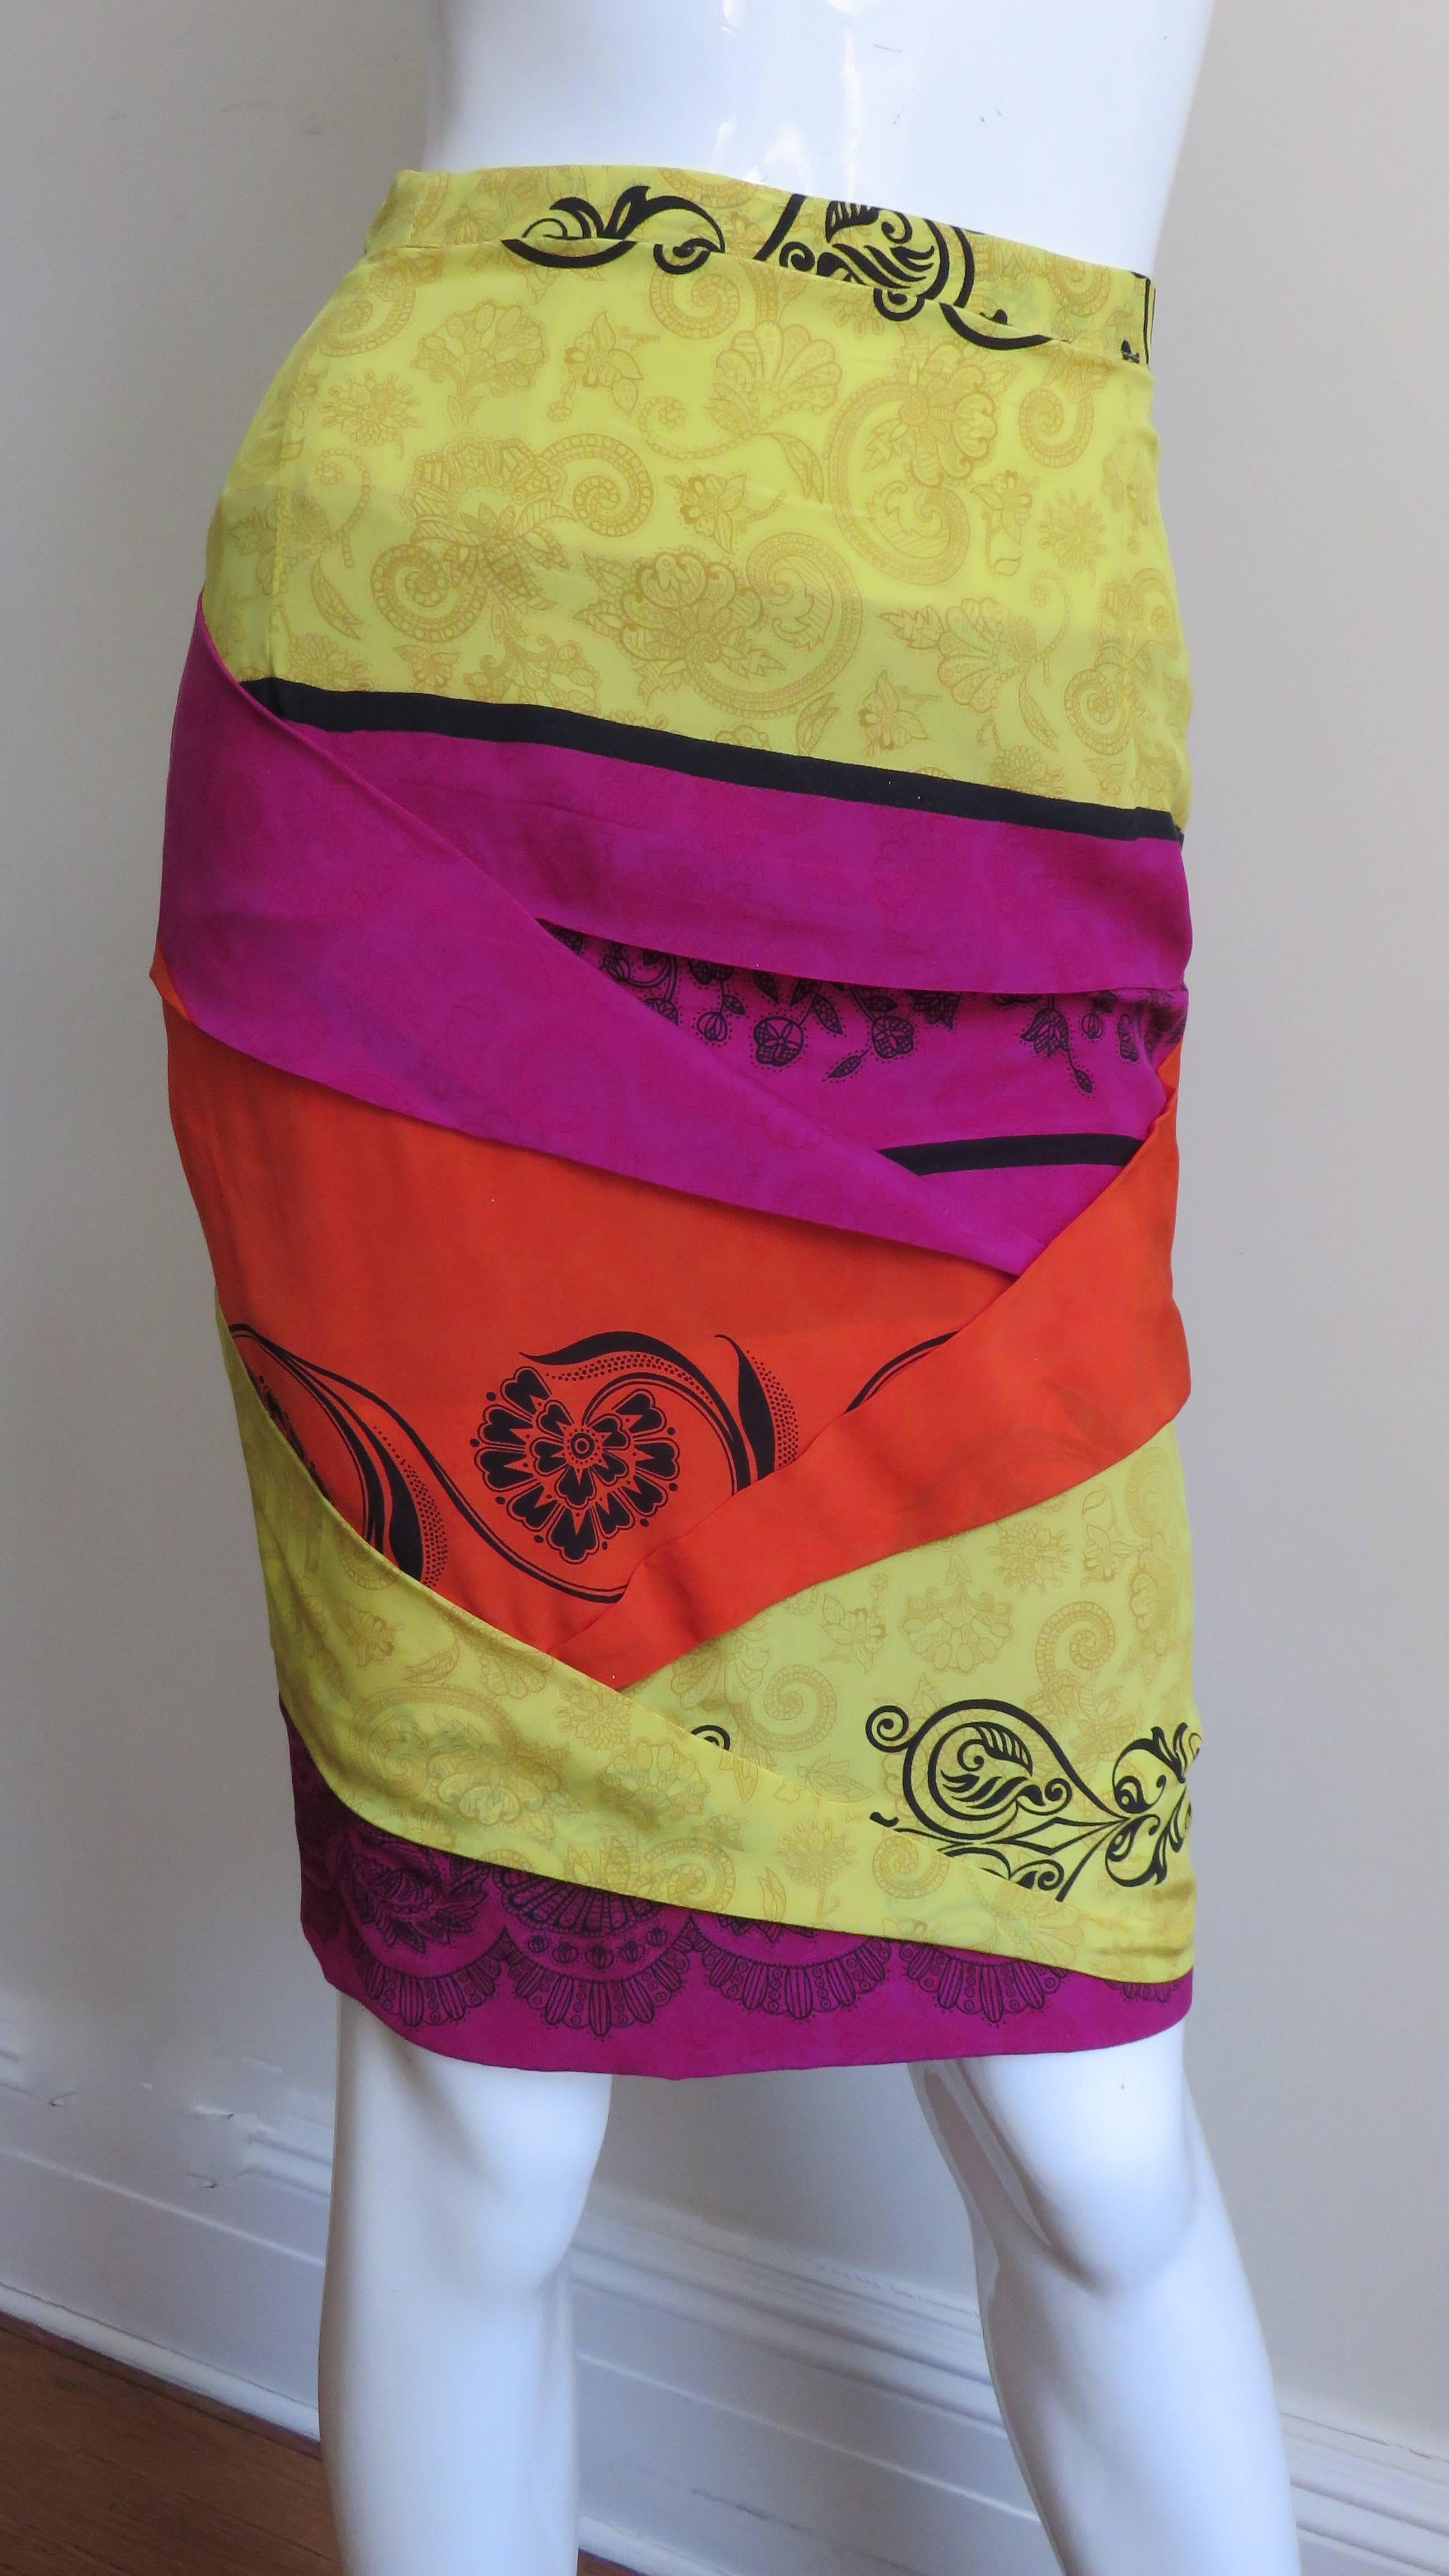 A fabulous silk skirt from Gianni Versace in yellow, orange and bright pink silk accented with a black abstract print. The skirt front and back has angled overlapping folds. It has a side zipper, a button at the waistband and matching pink